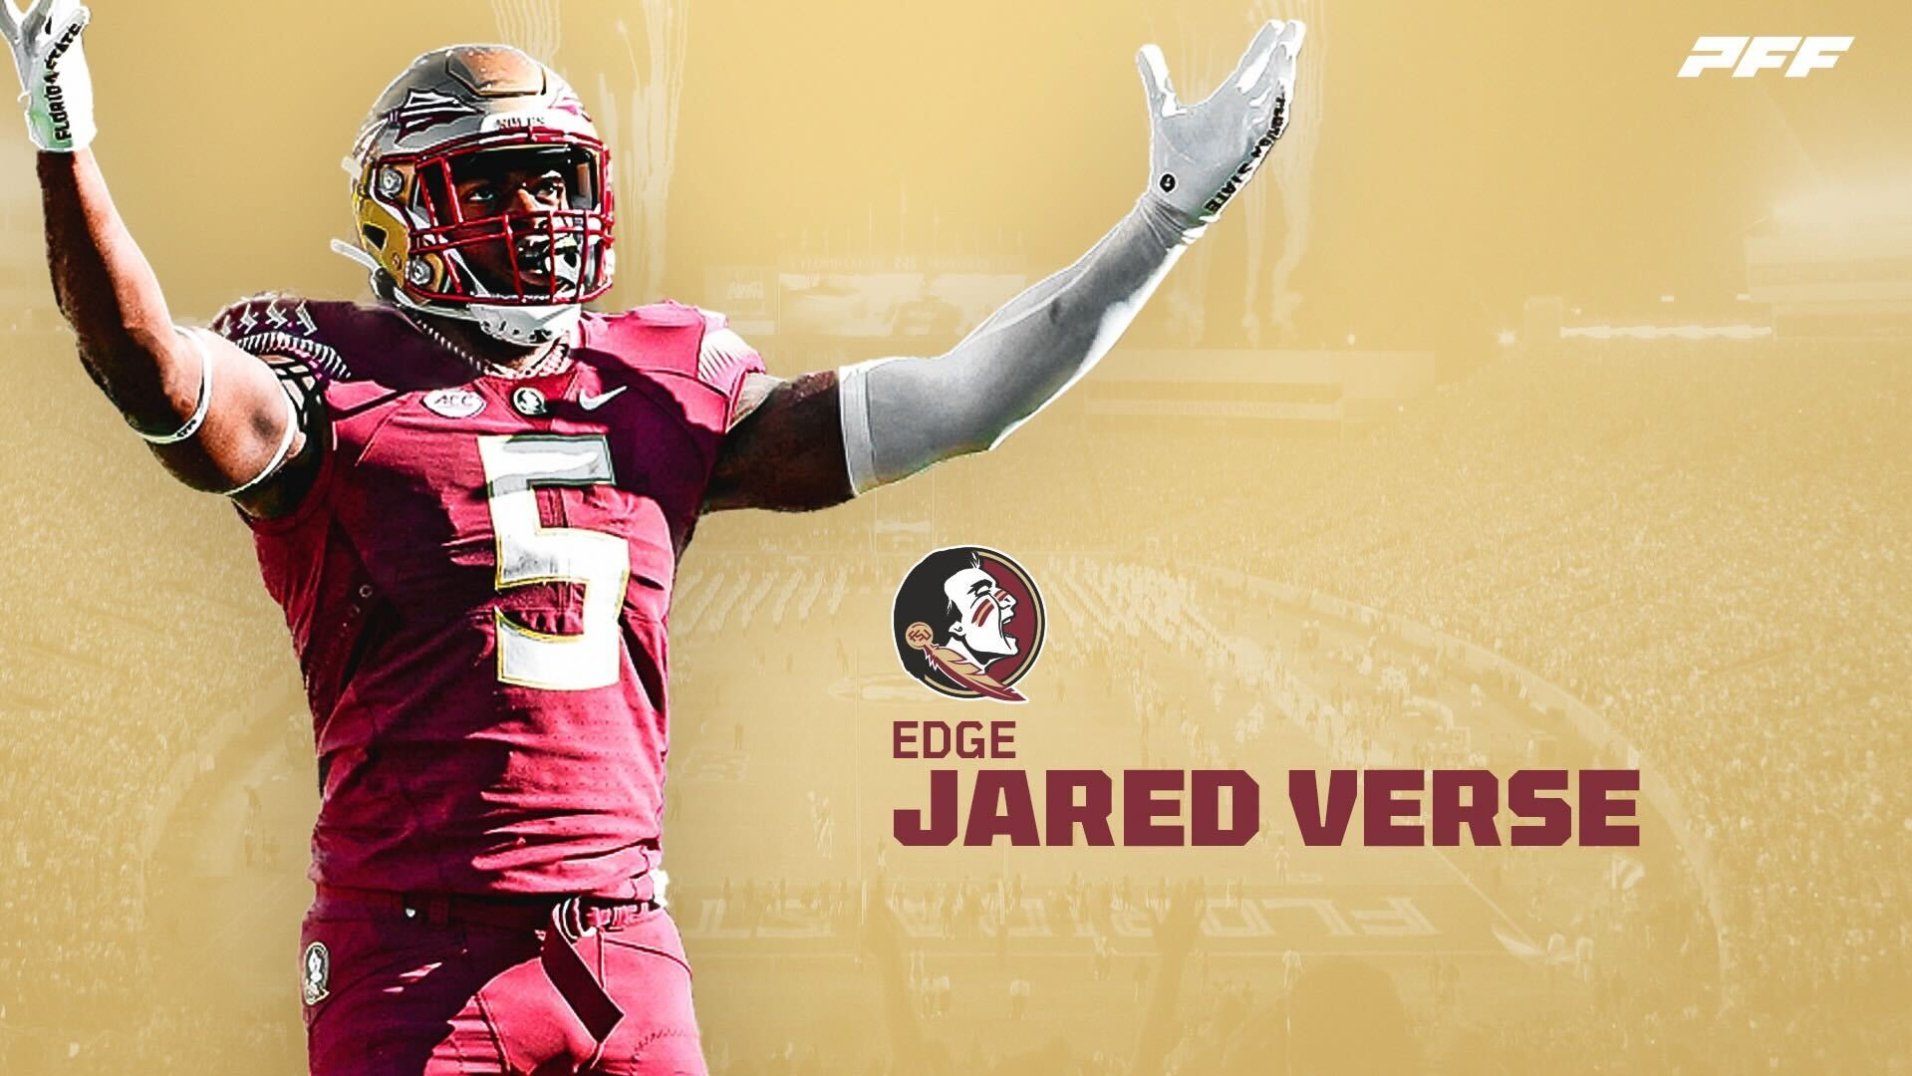 Florida State's Jared Verse on track to go from FCS standout to future